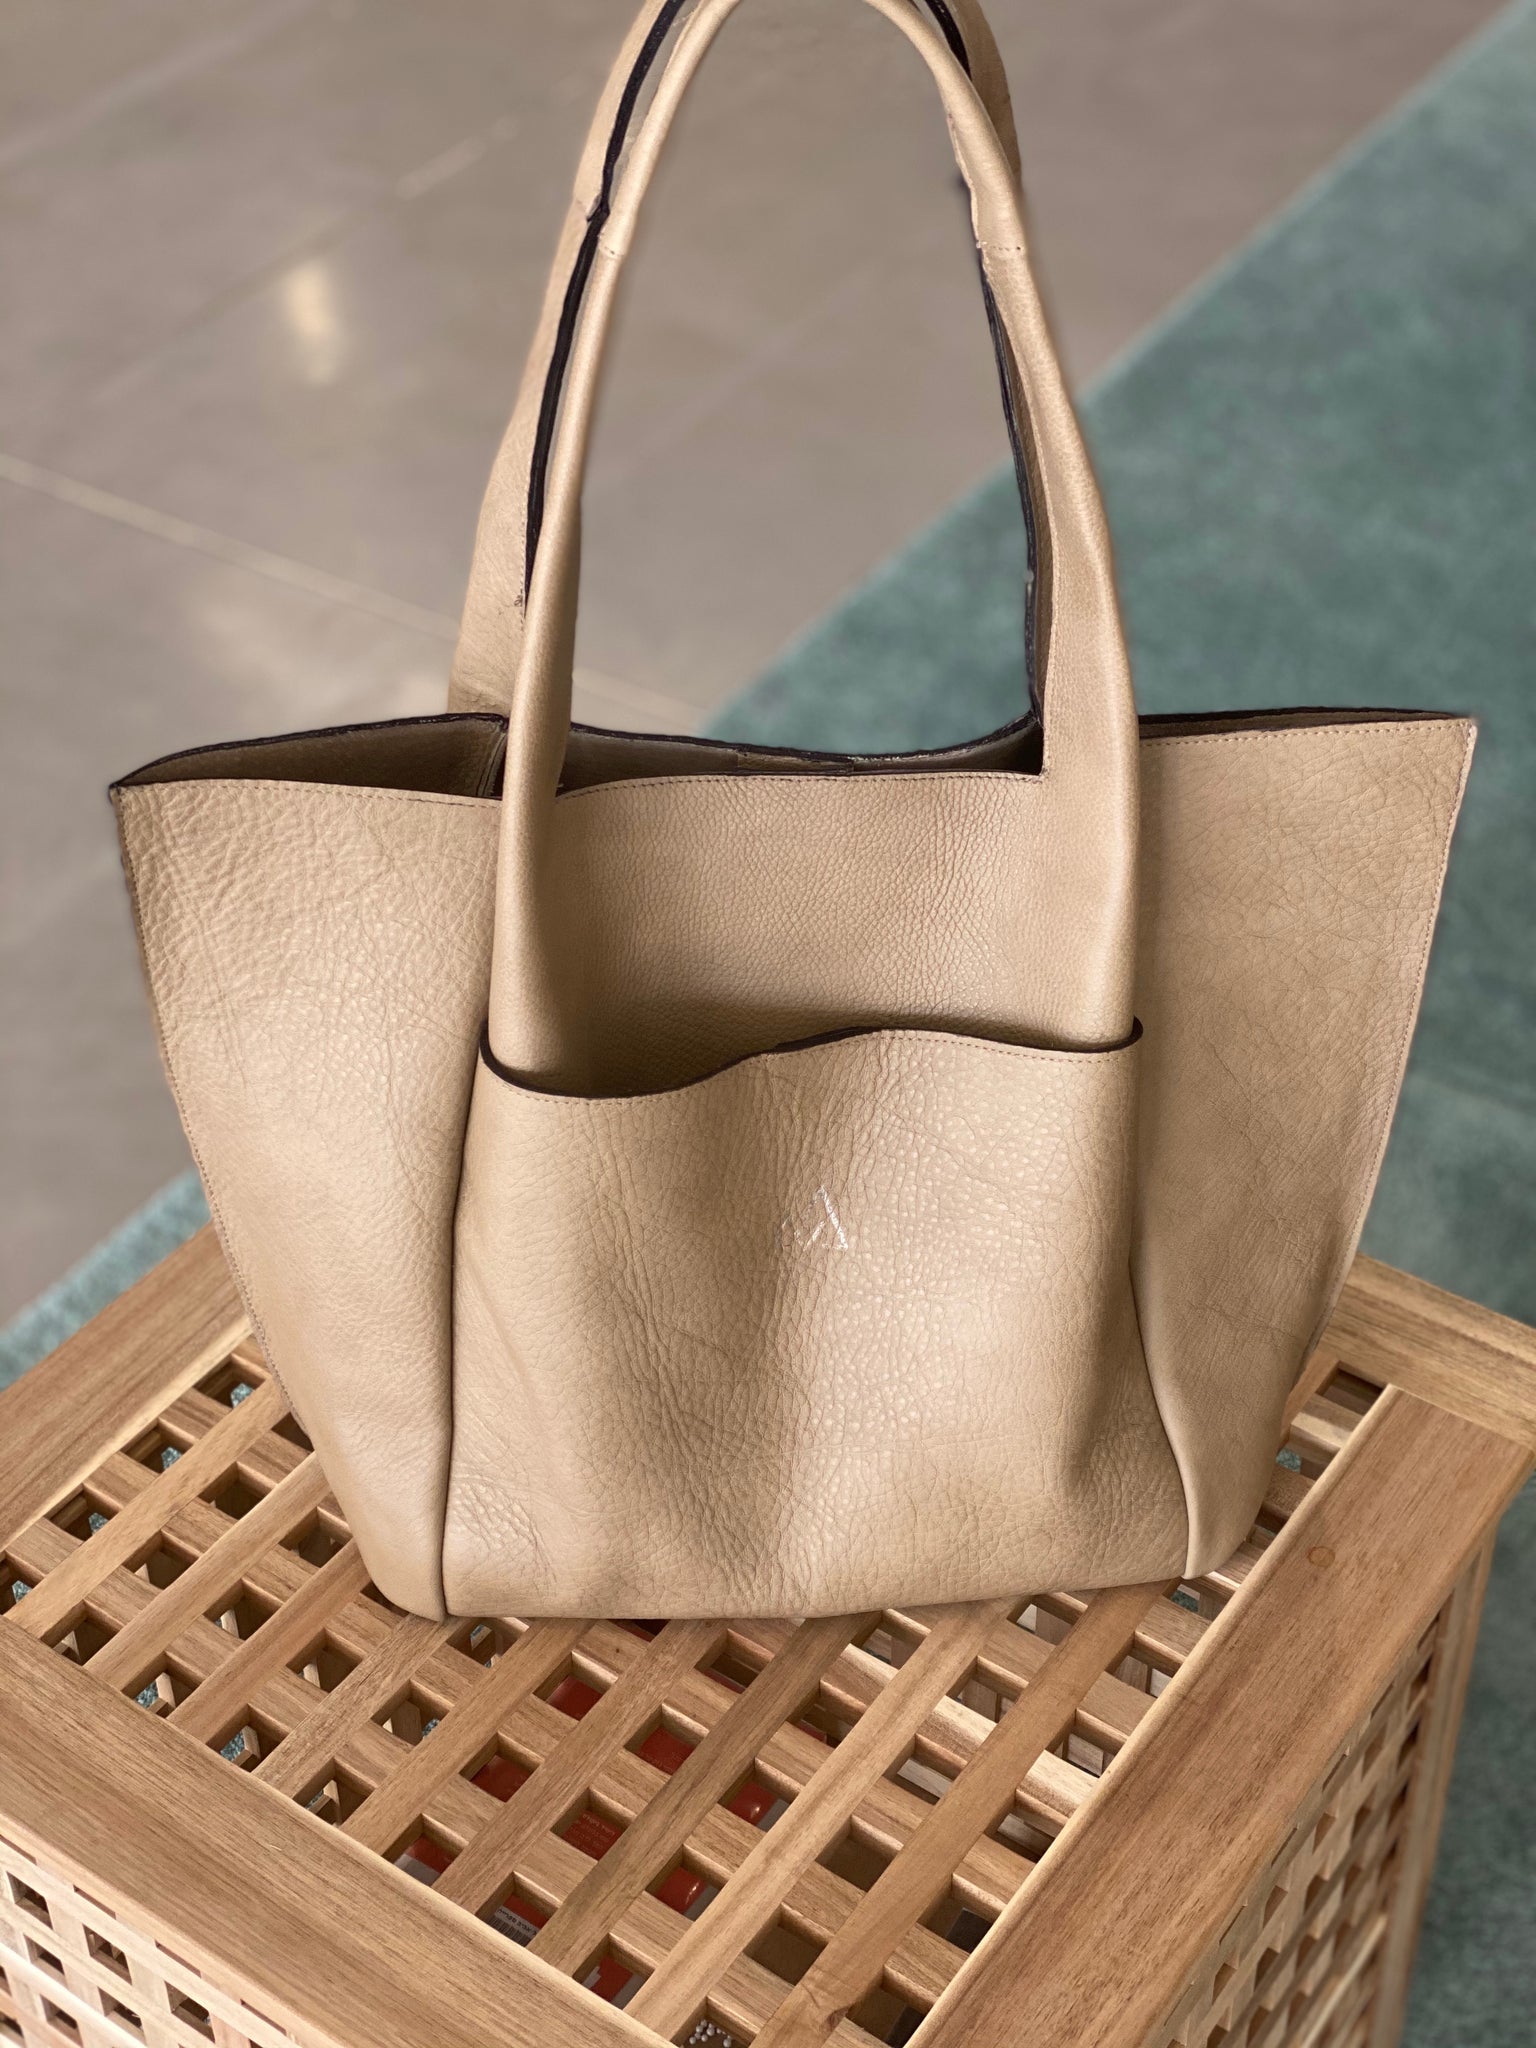 Leather Tote Bag With Large Outside Pocket. 4 Colors 